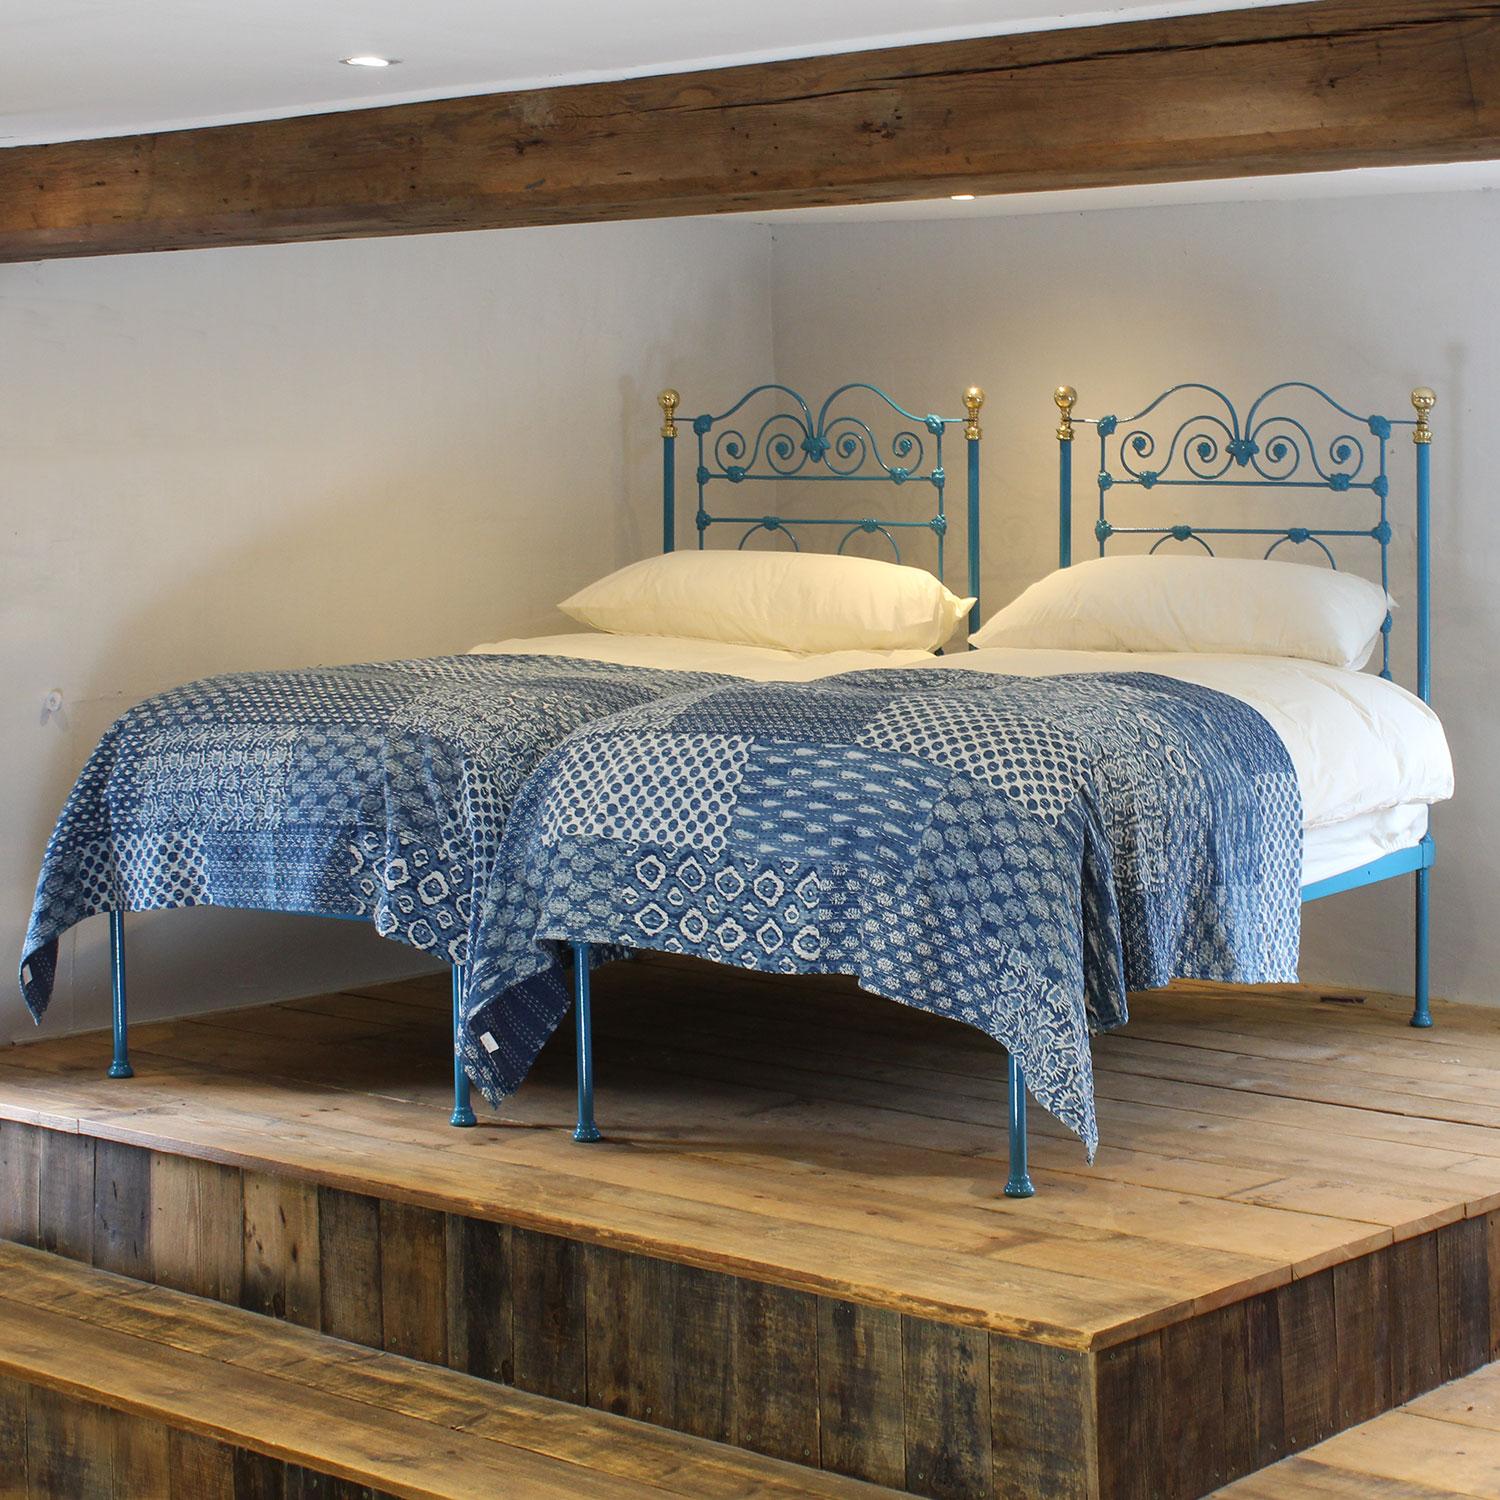 A matching pair of single low end/platform bedsteads, finished in Moroccan blue.

The price includes a pair of single firm platform bases.

The mattresses, bedding and bed linen are extra.